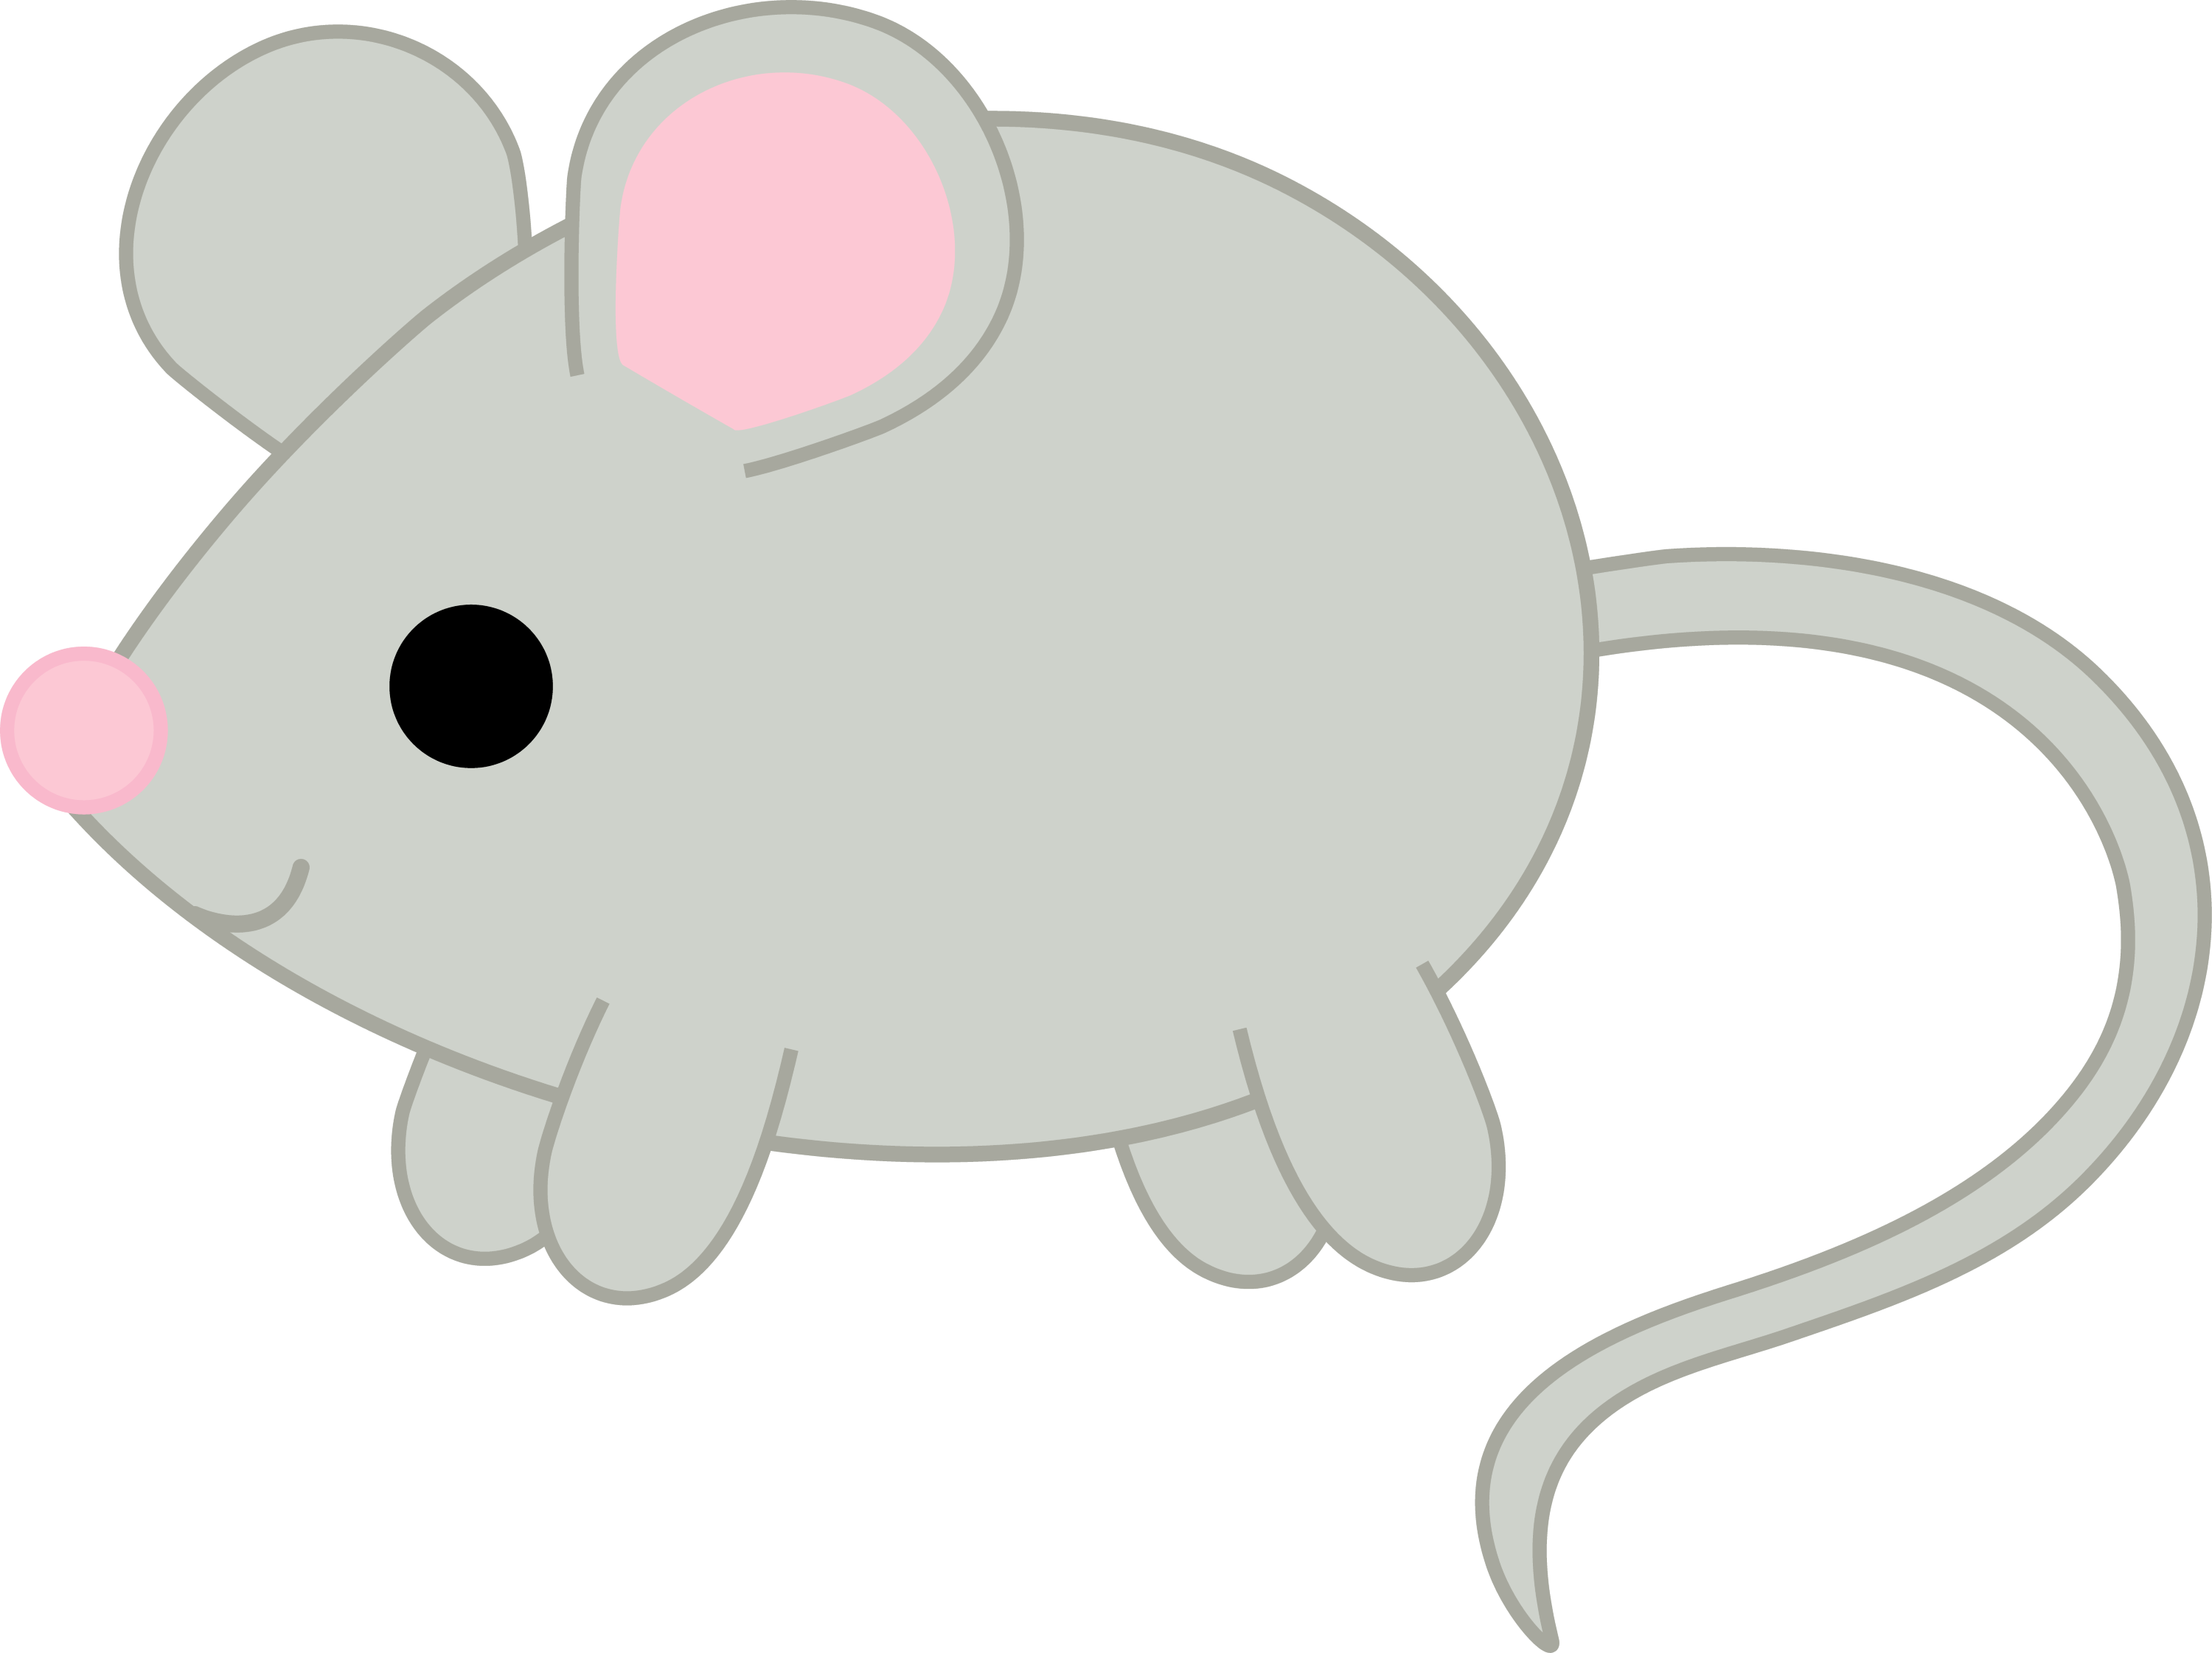 clipart of a mouse - photo #48